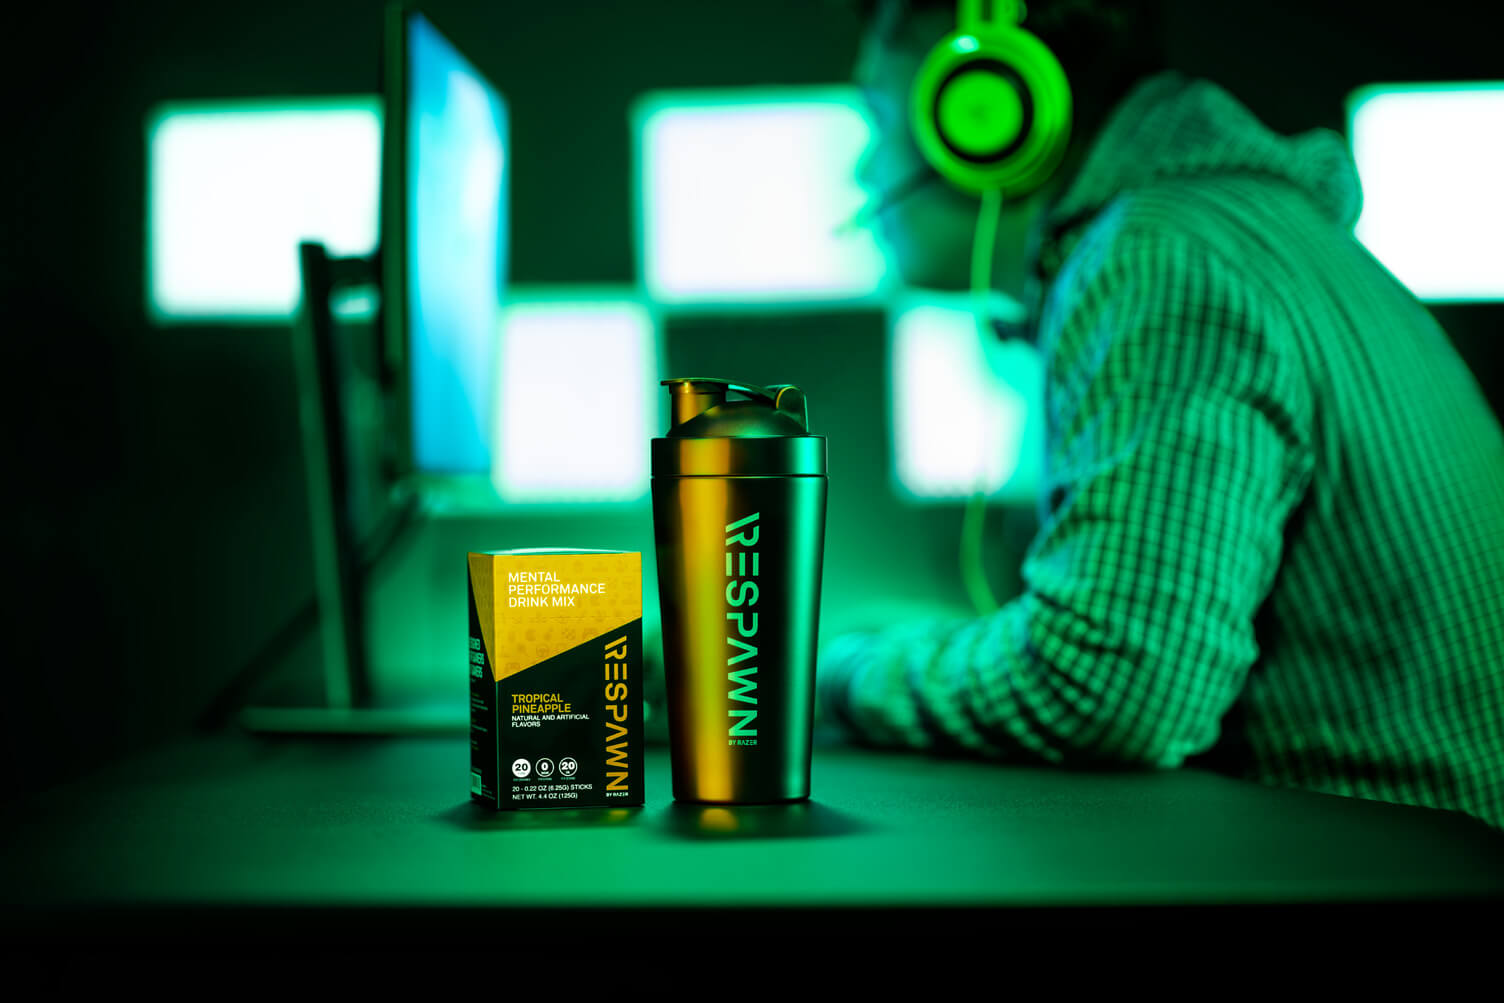 Razer's Respawn drink mix is meant to heighten mental performance while gaming